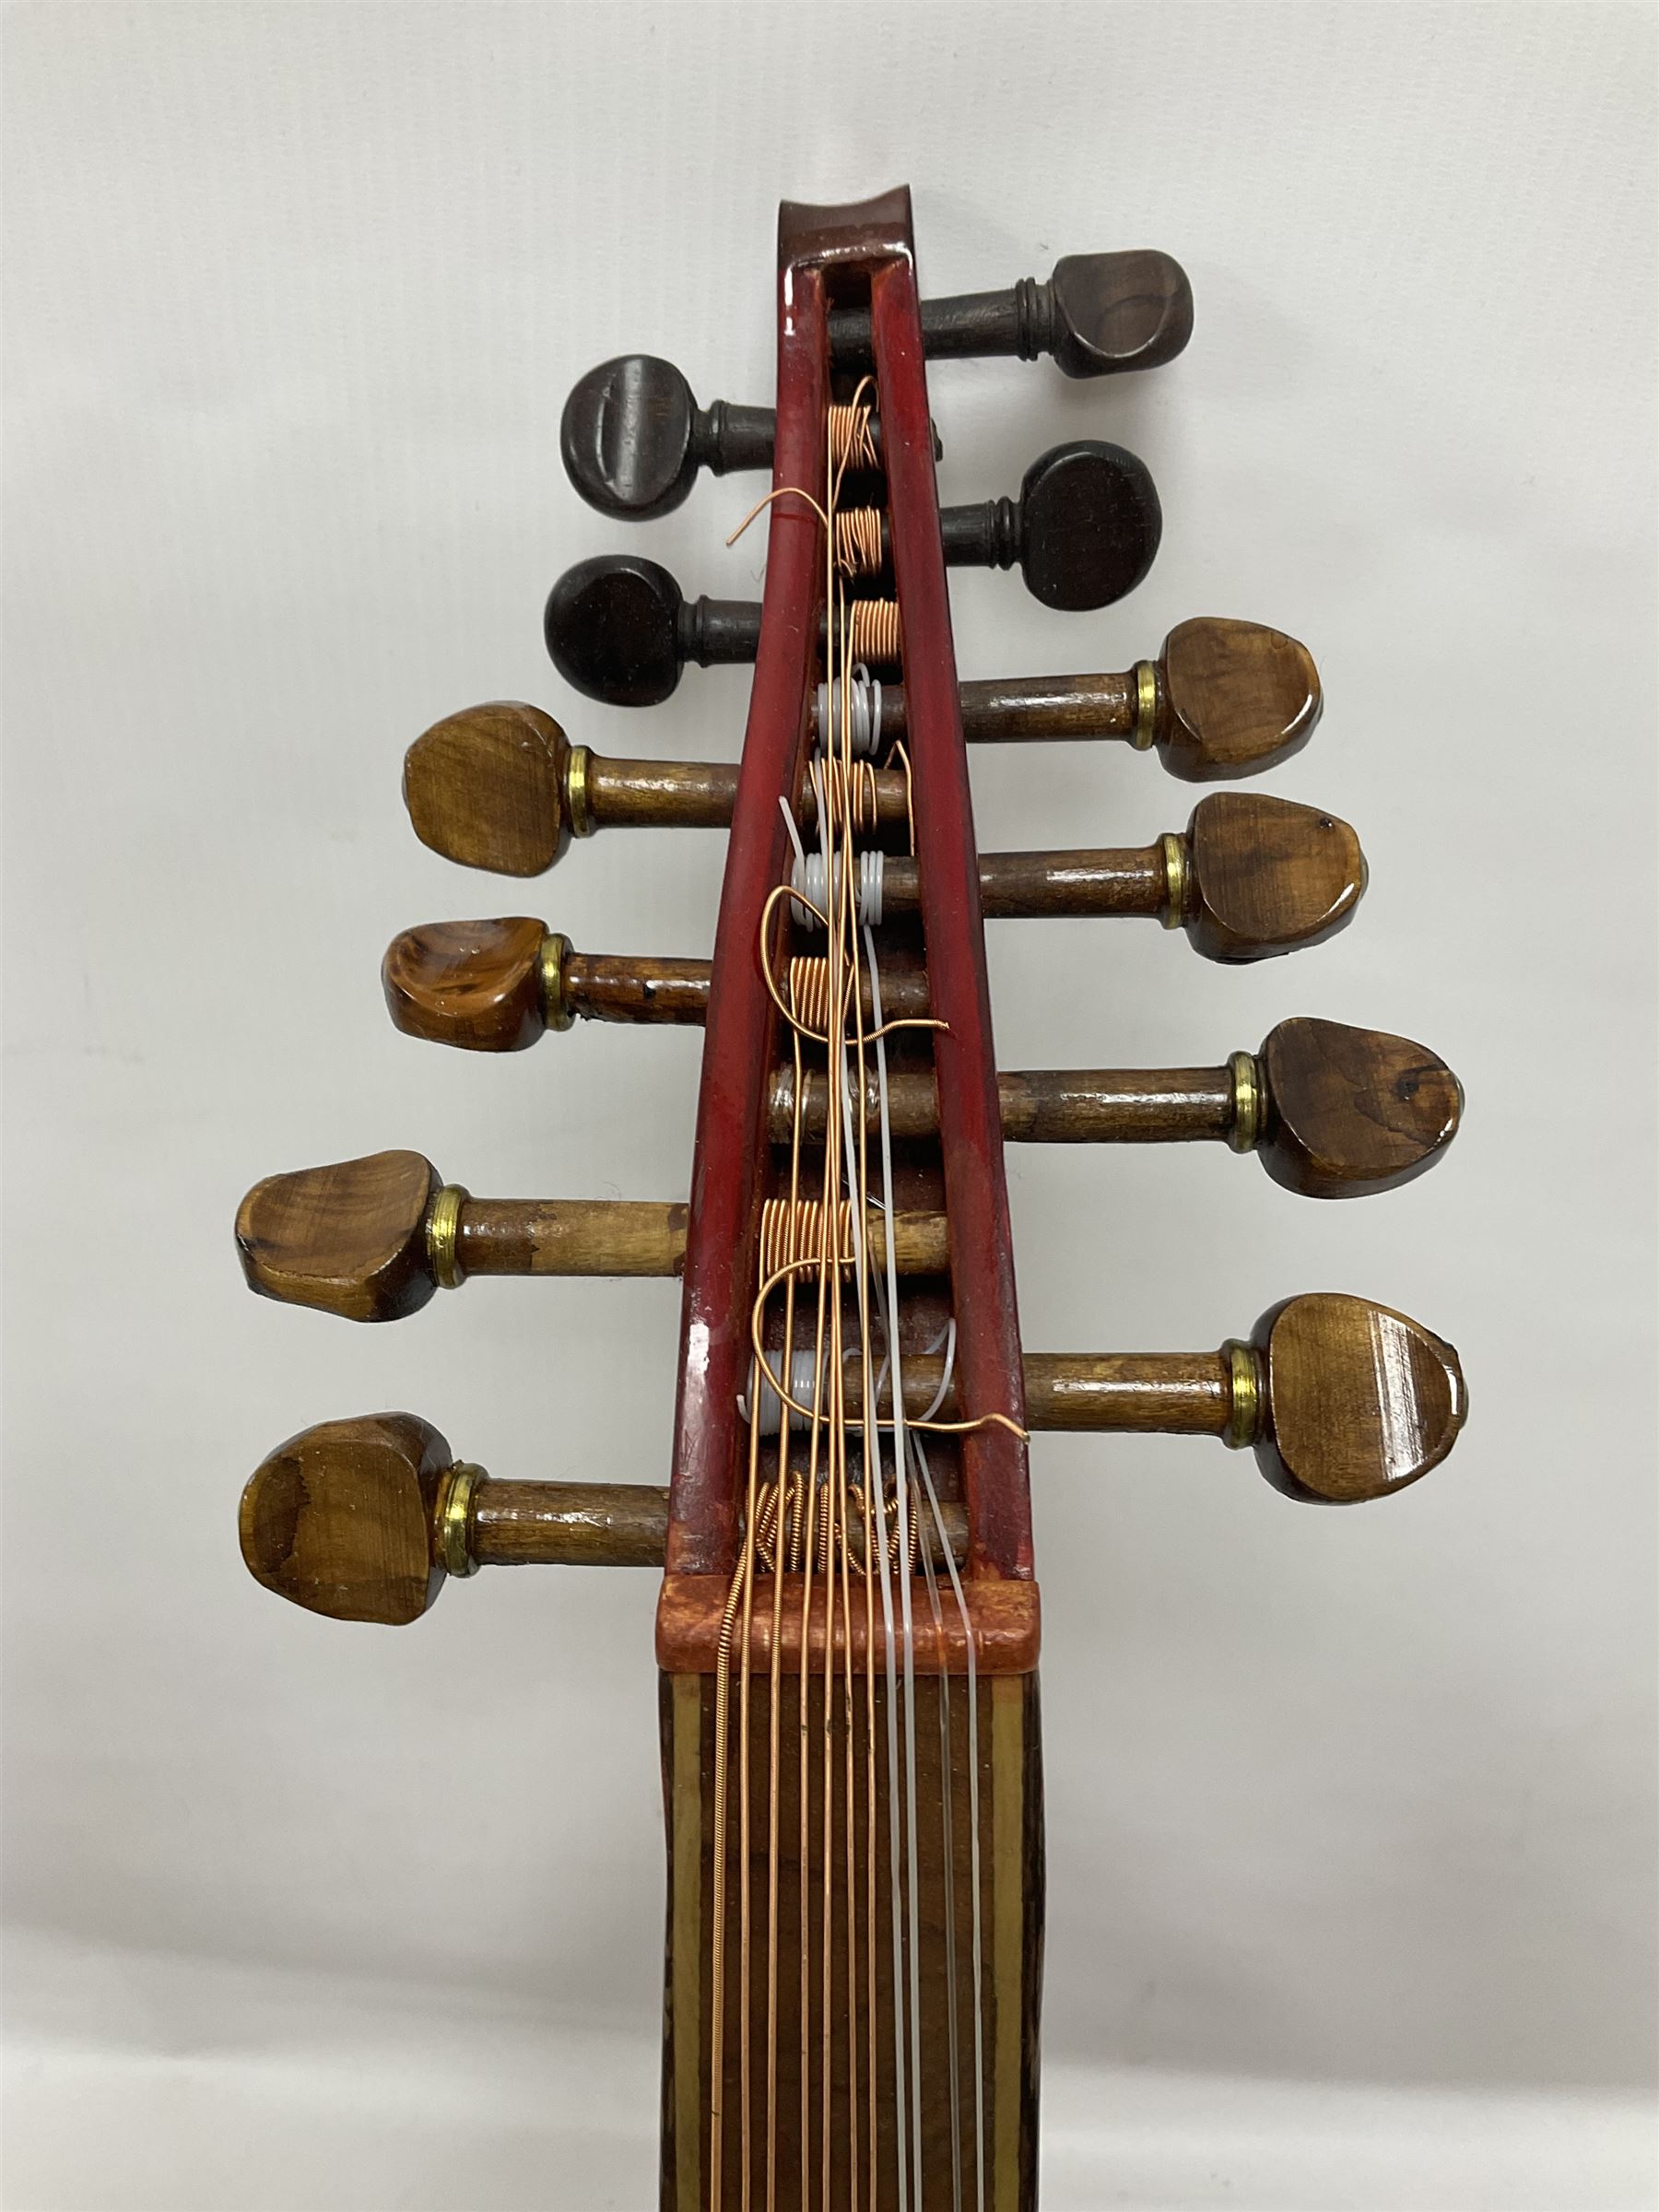 20th century Middle Eastern six string lute with a segmented back and a purpose designed hardwood st - Image 9 of 16